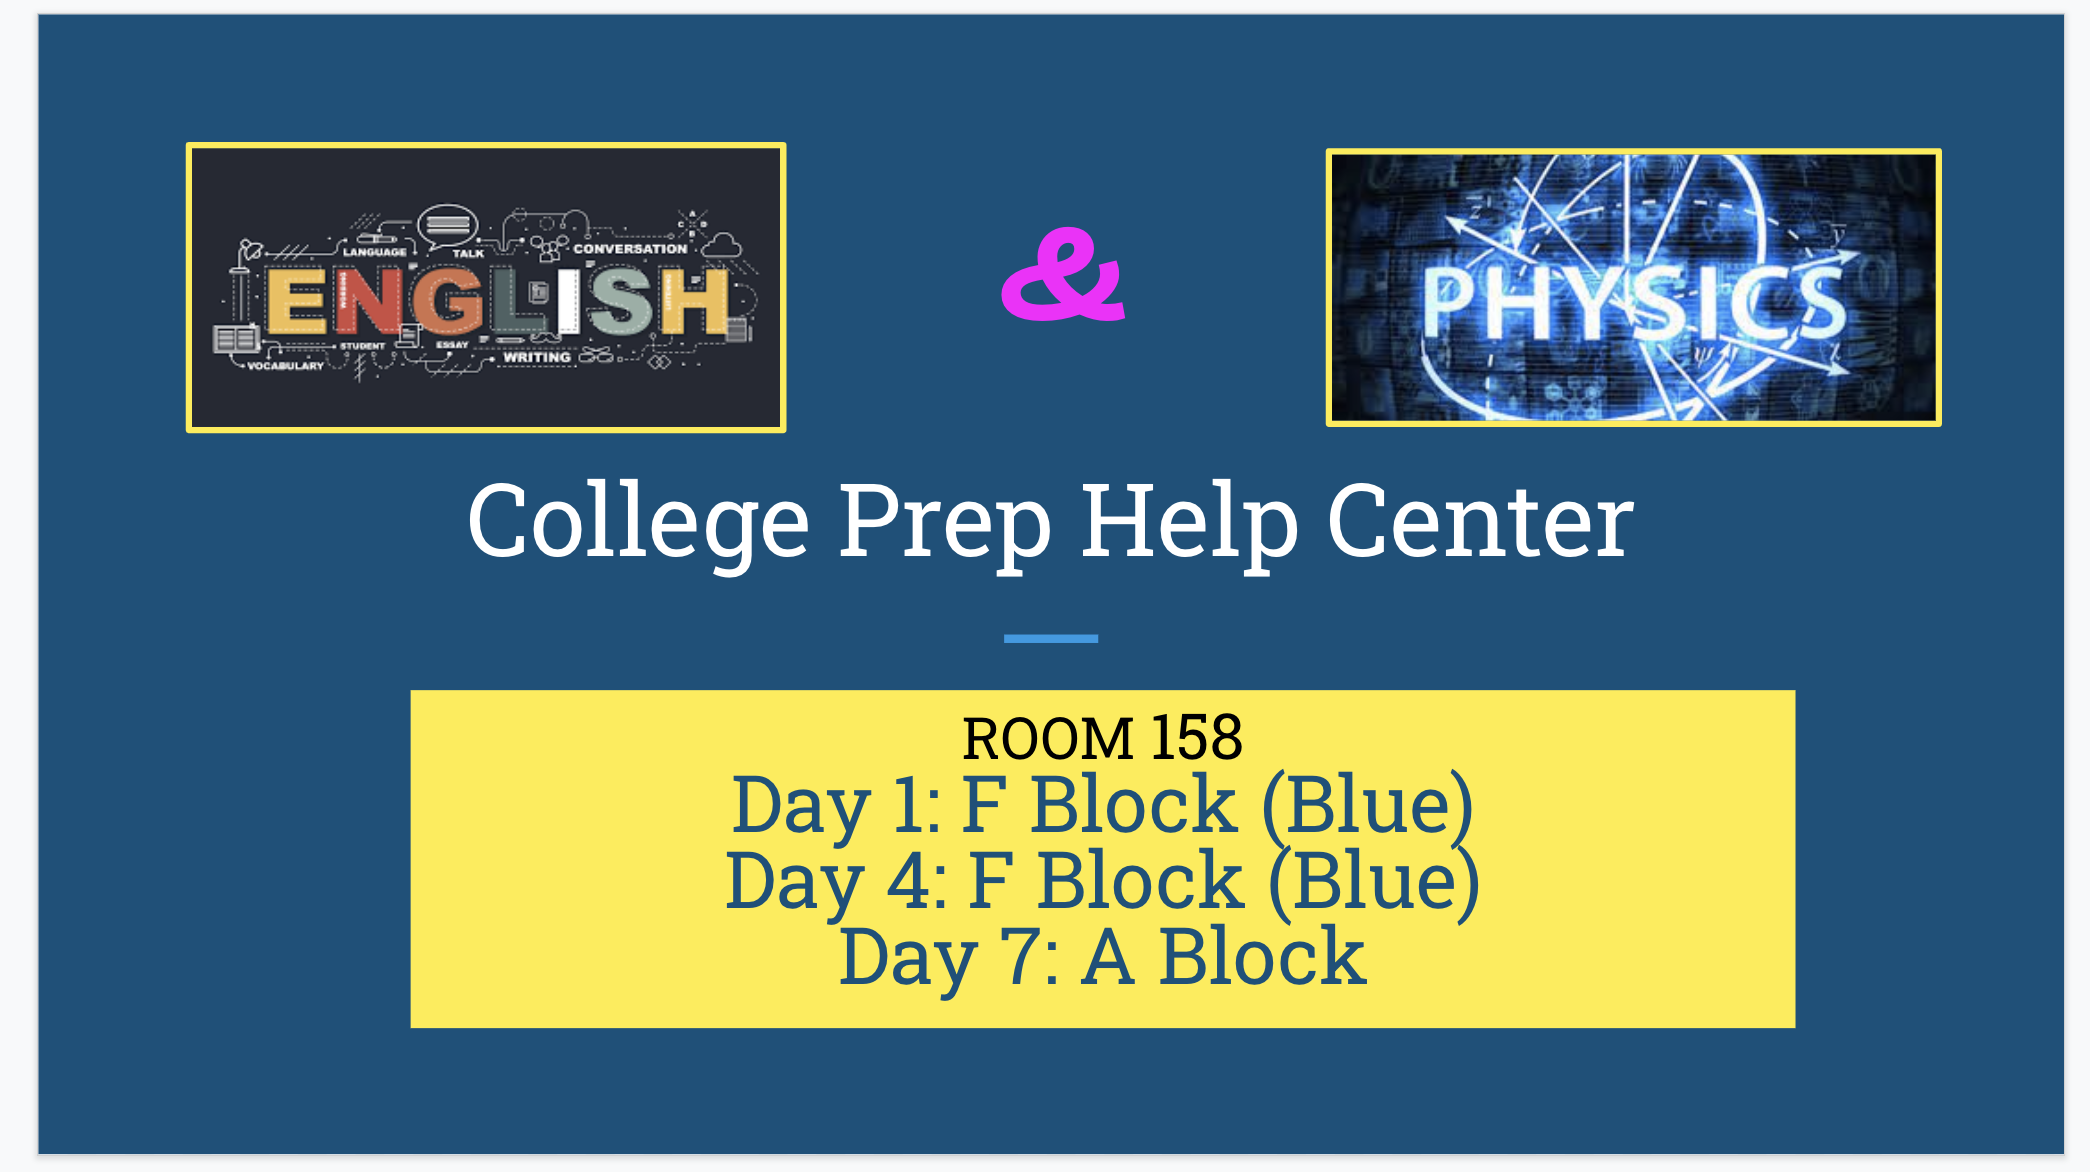 CP Help Center available last block on day 1 and 4, and A block (1st block) day 7.